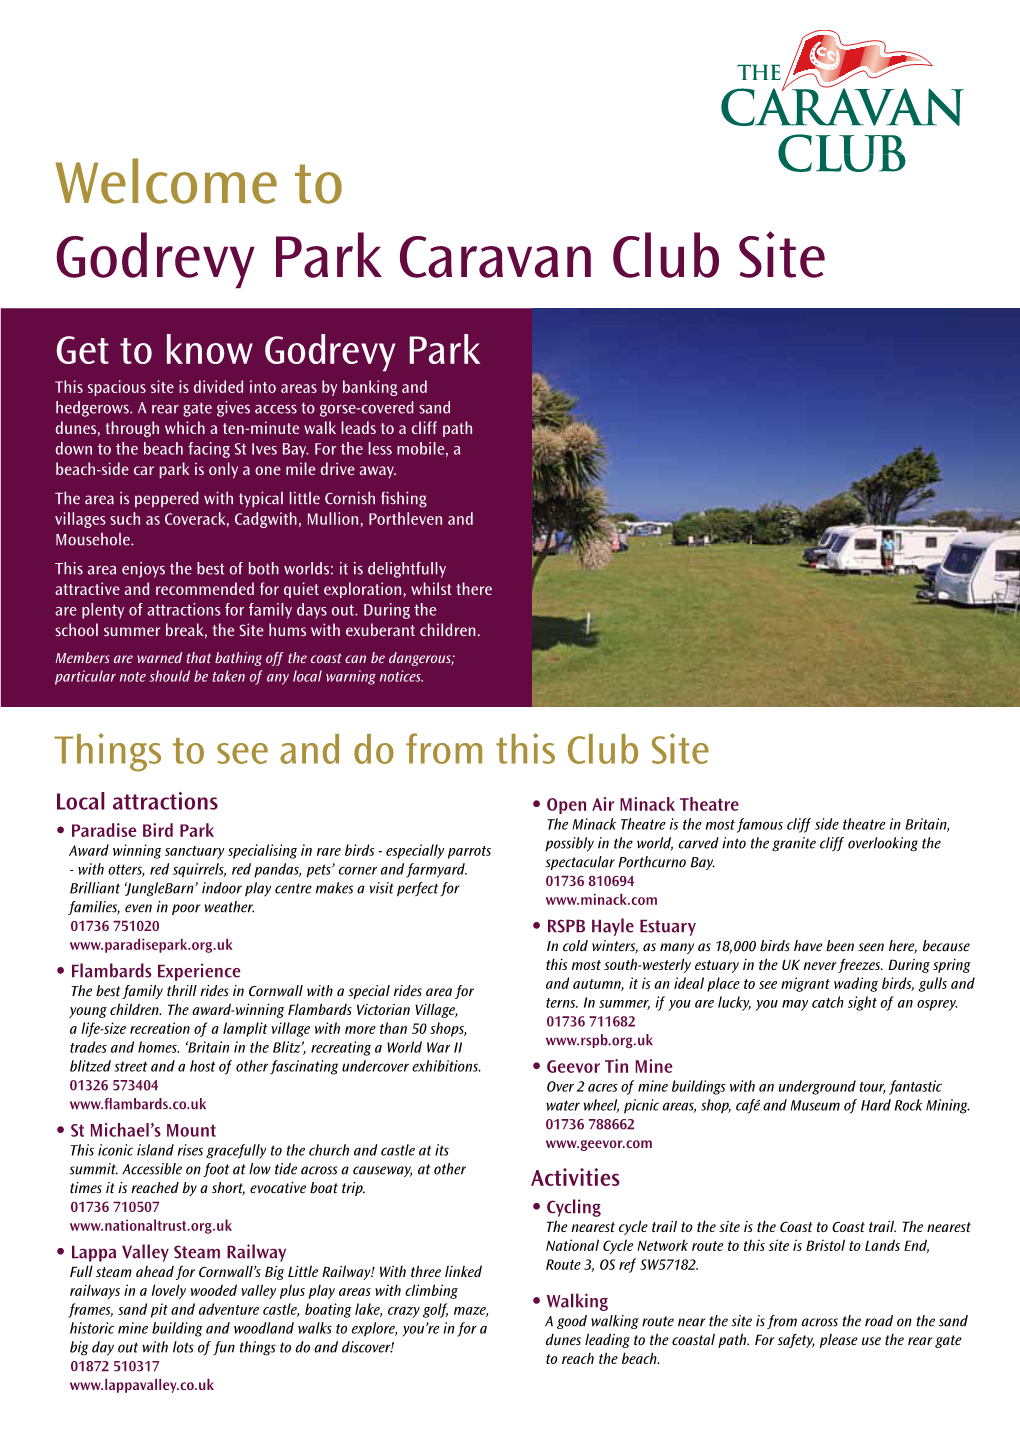 Welcome to Godrevy Park Caravan Club Site Get to Know Godrevy Park This Spacious Site Is Divided Into Areas by Banking and Hedgerows